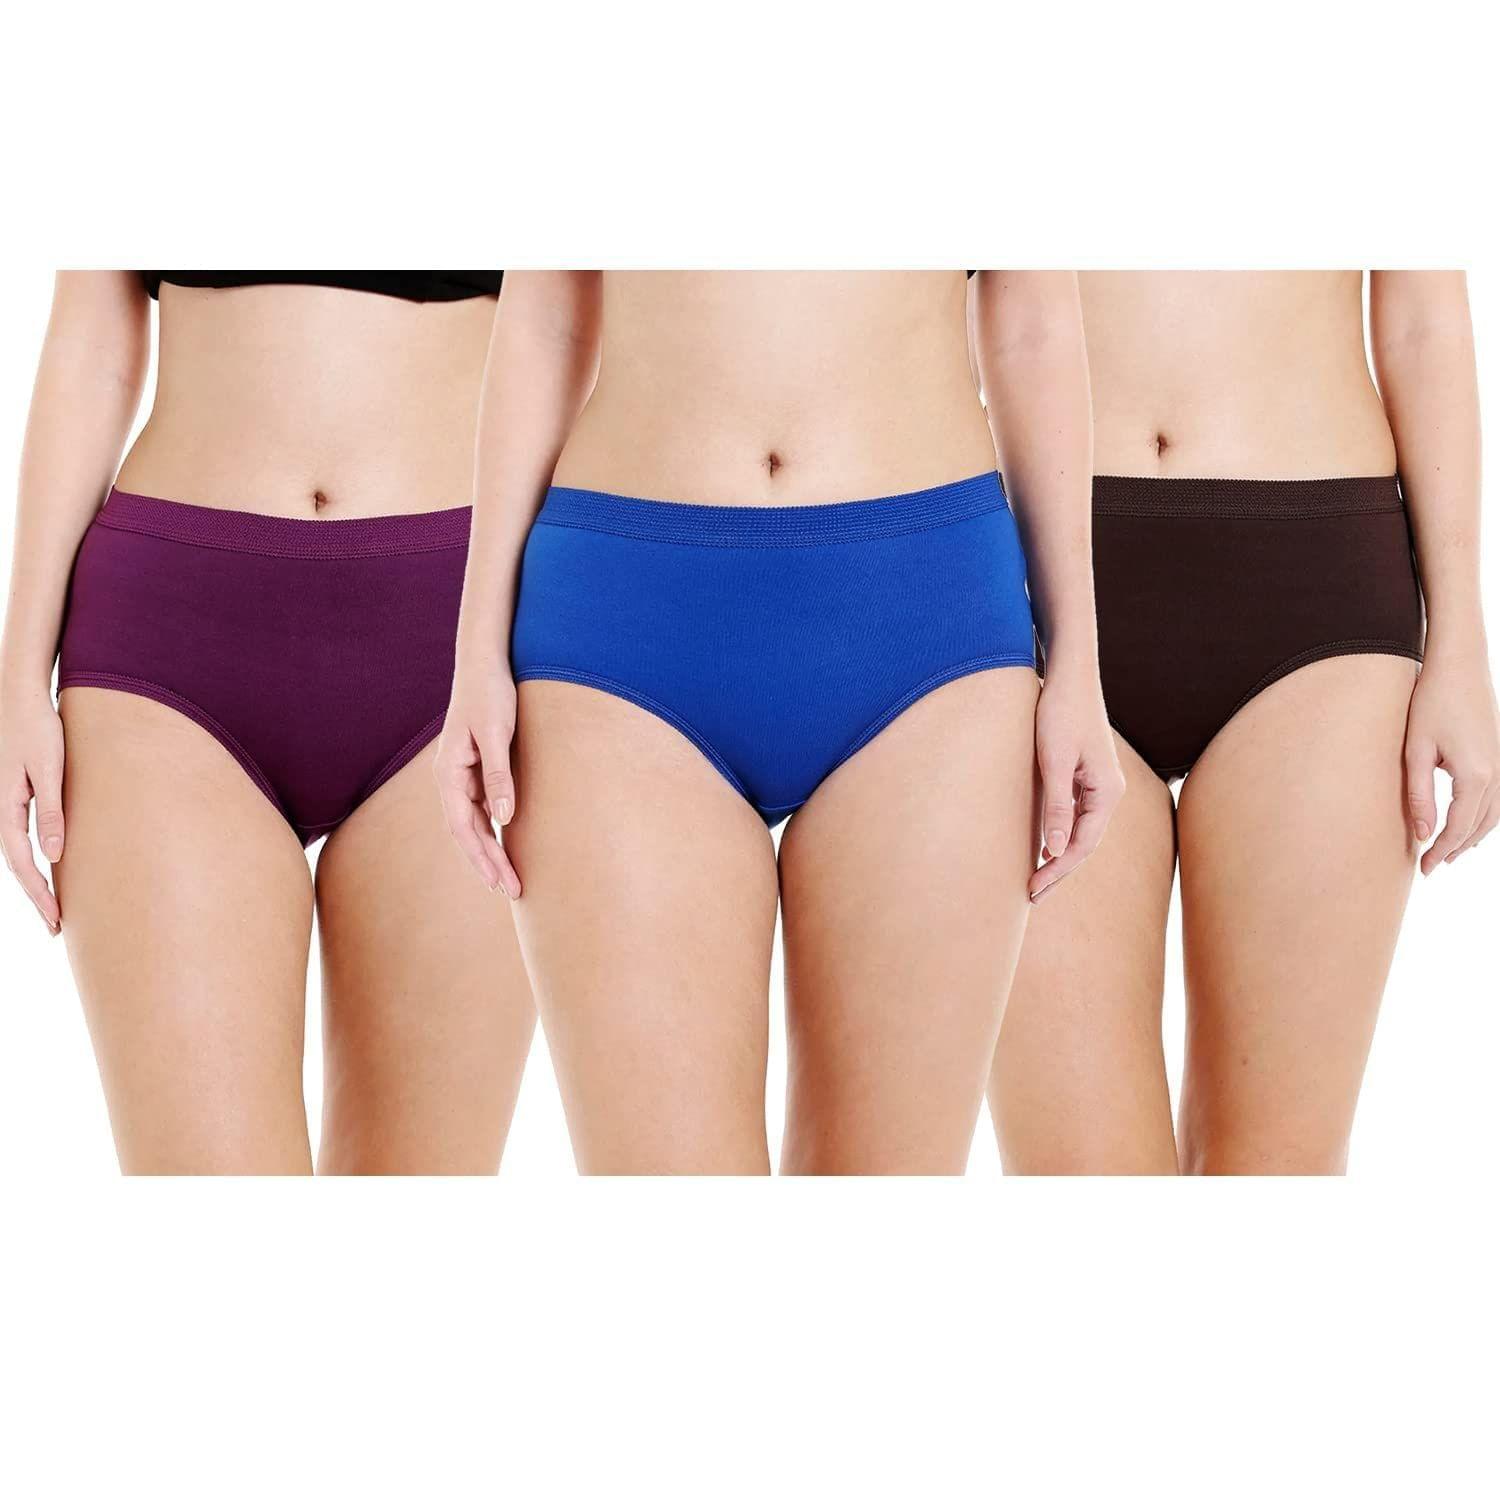 Bodycare Women Cotton 3pcs Panty Pack In Assorted Colors 90